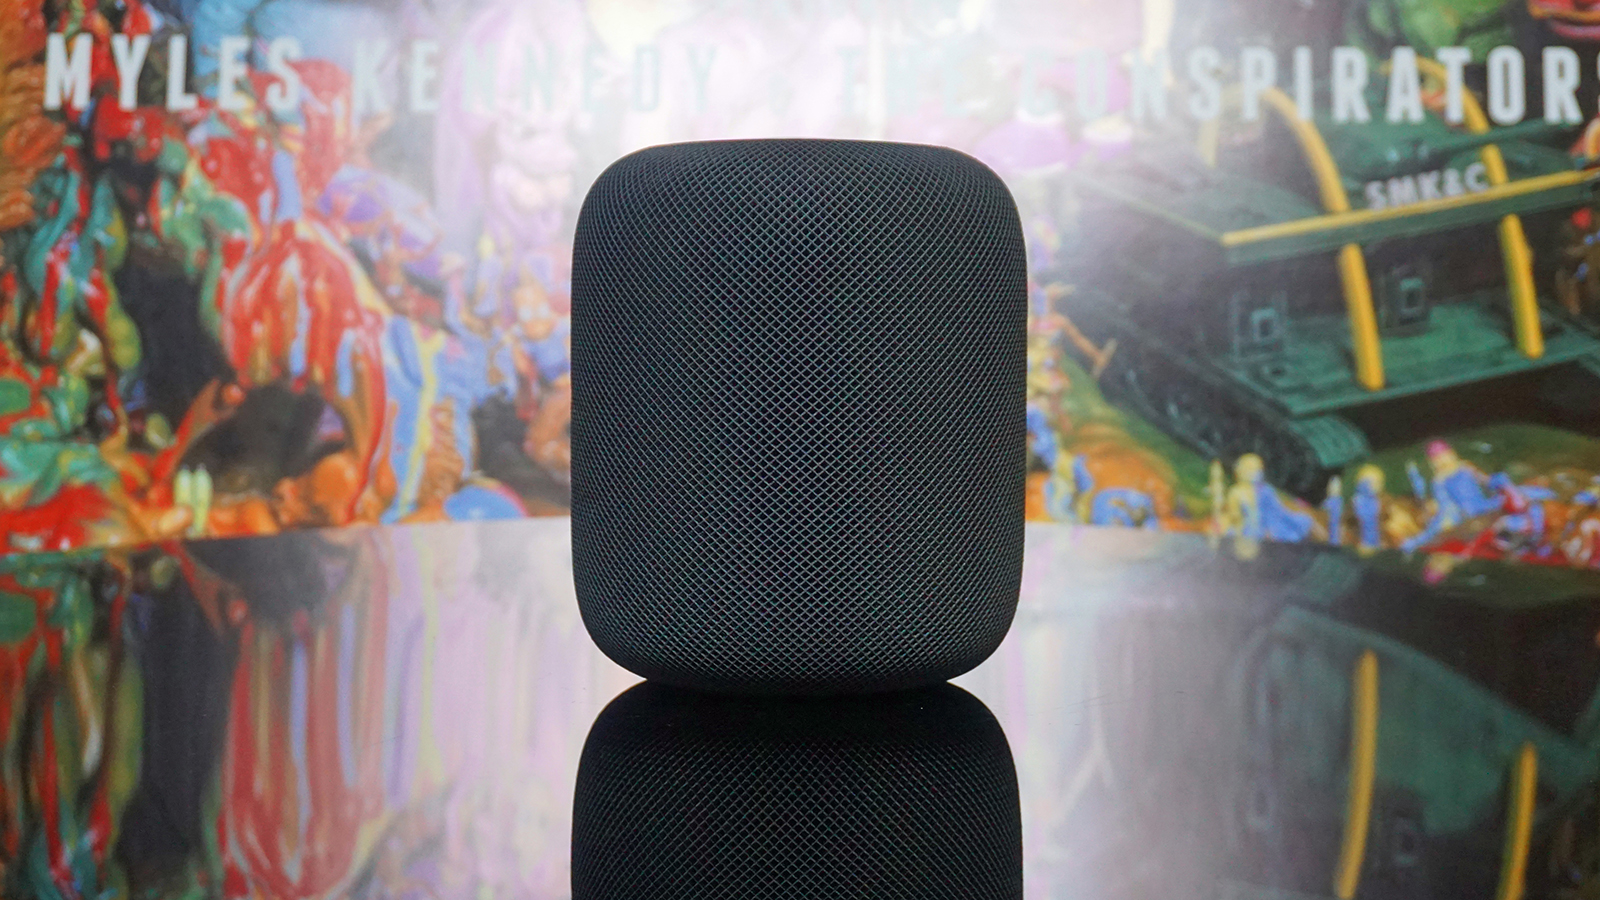 The Apple HomePod in gray